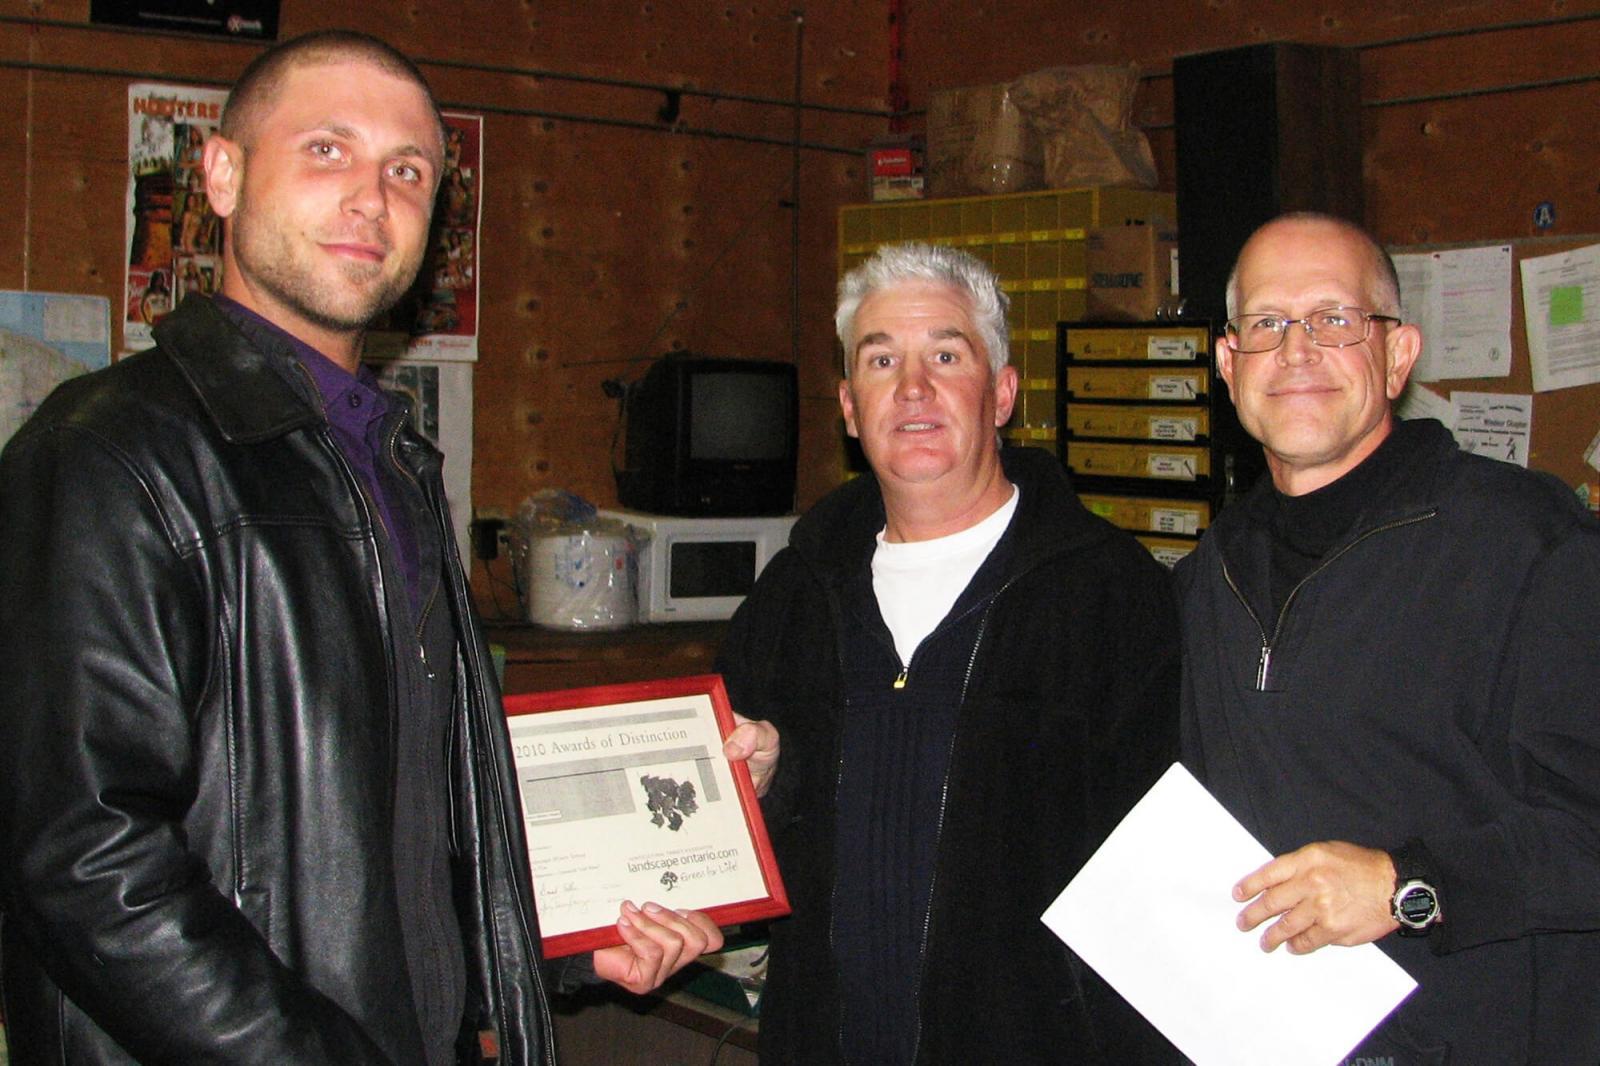 Chris Kaiser of the The Landscape Effects Group receives an award from Mark Williams and Jay Terryberry.